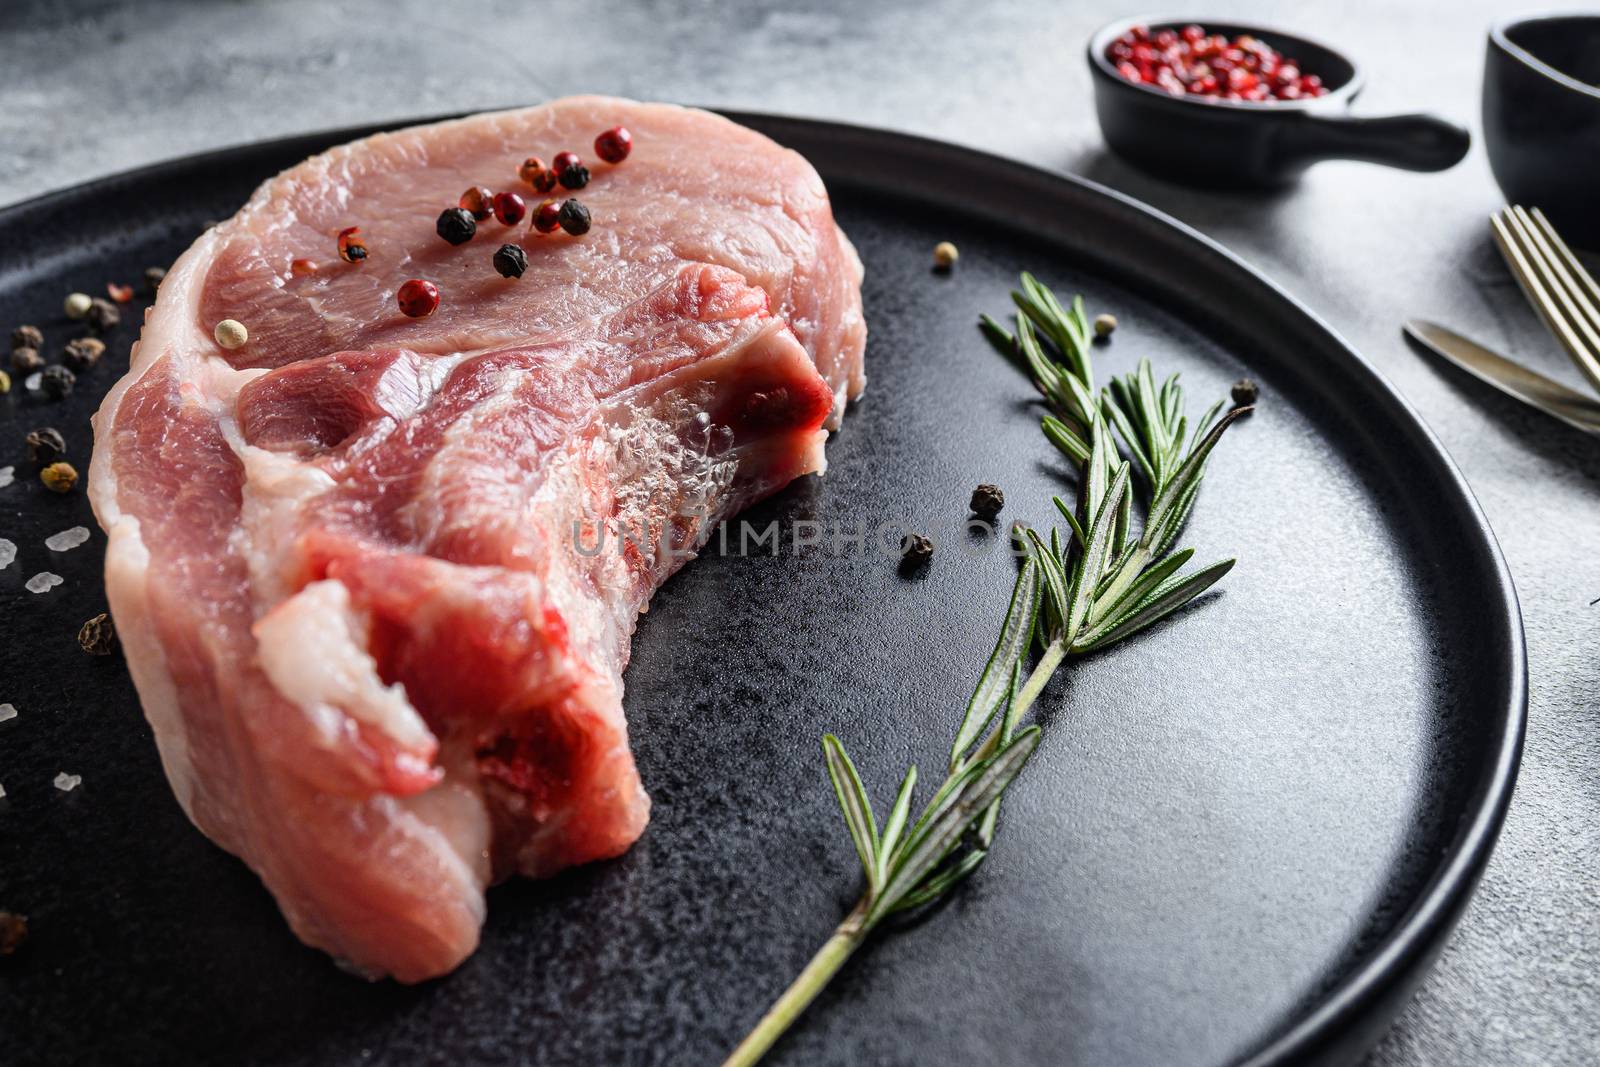 Raw Pork Loin chops in a black round plate on a grey textured stone background with rosemary garlic peppercorns ingredients for grill close up selective focus new wide angel.